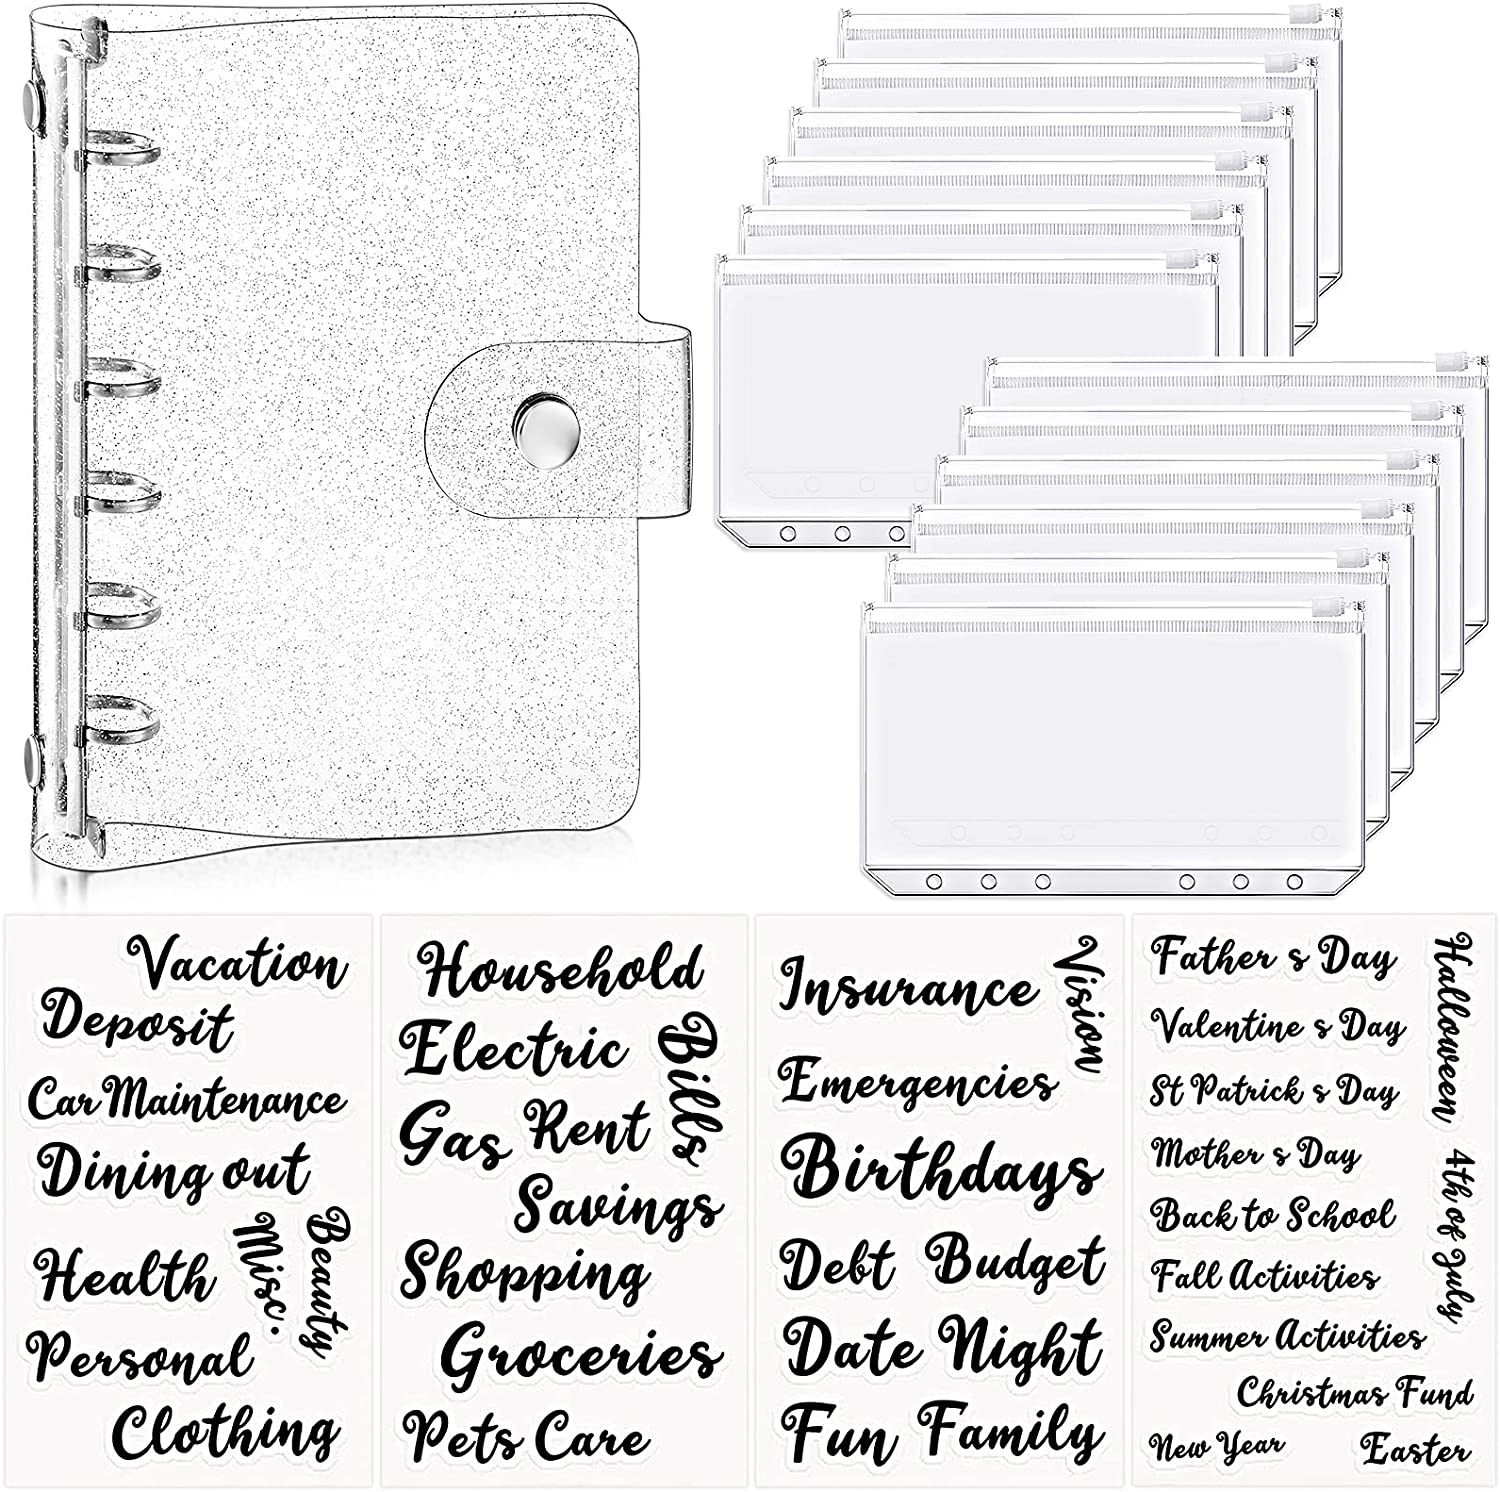 A7 Planner Inserts for 11 Packs, A7 Agenda Refill, 100 gsm Thicker  Paper/4.84 x 3.23'', 45 Sheets(90…See more A7 Planner Inserts for 11 Packs,  A7